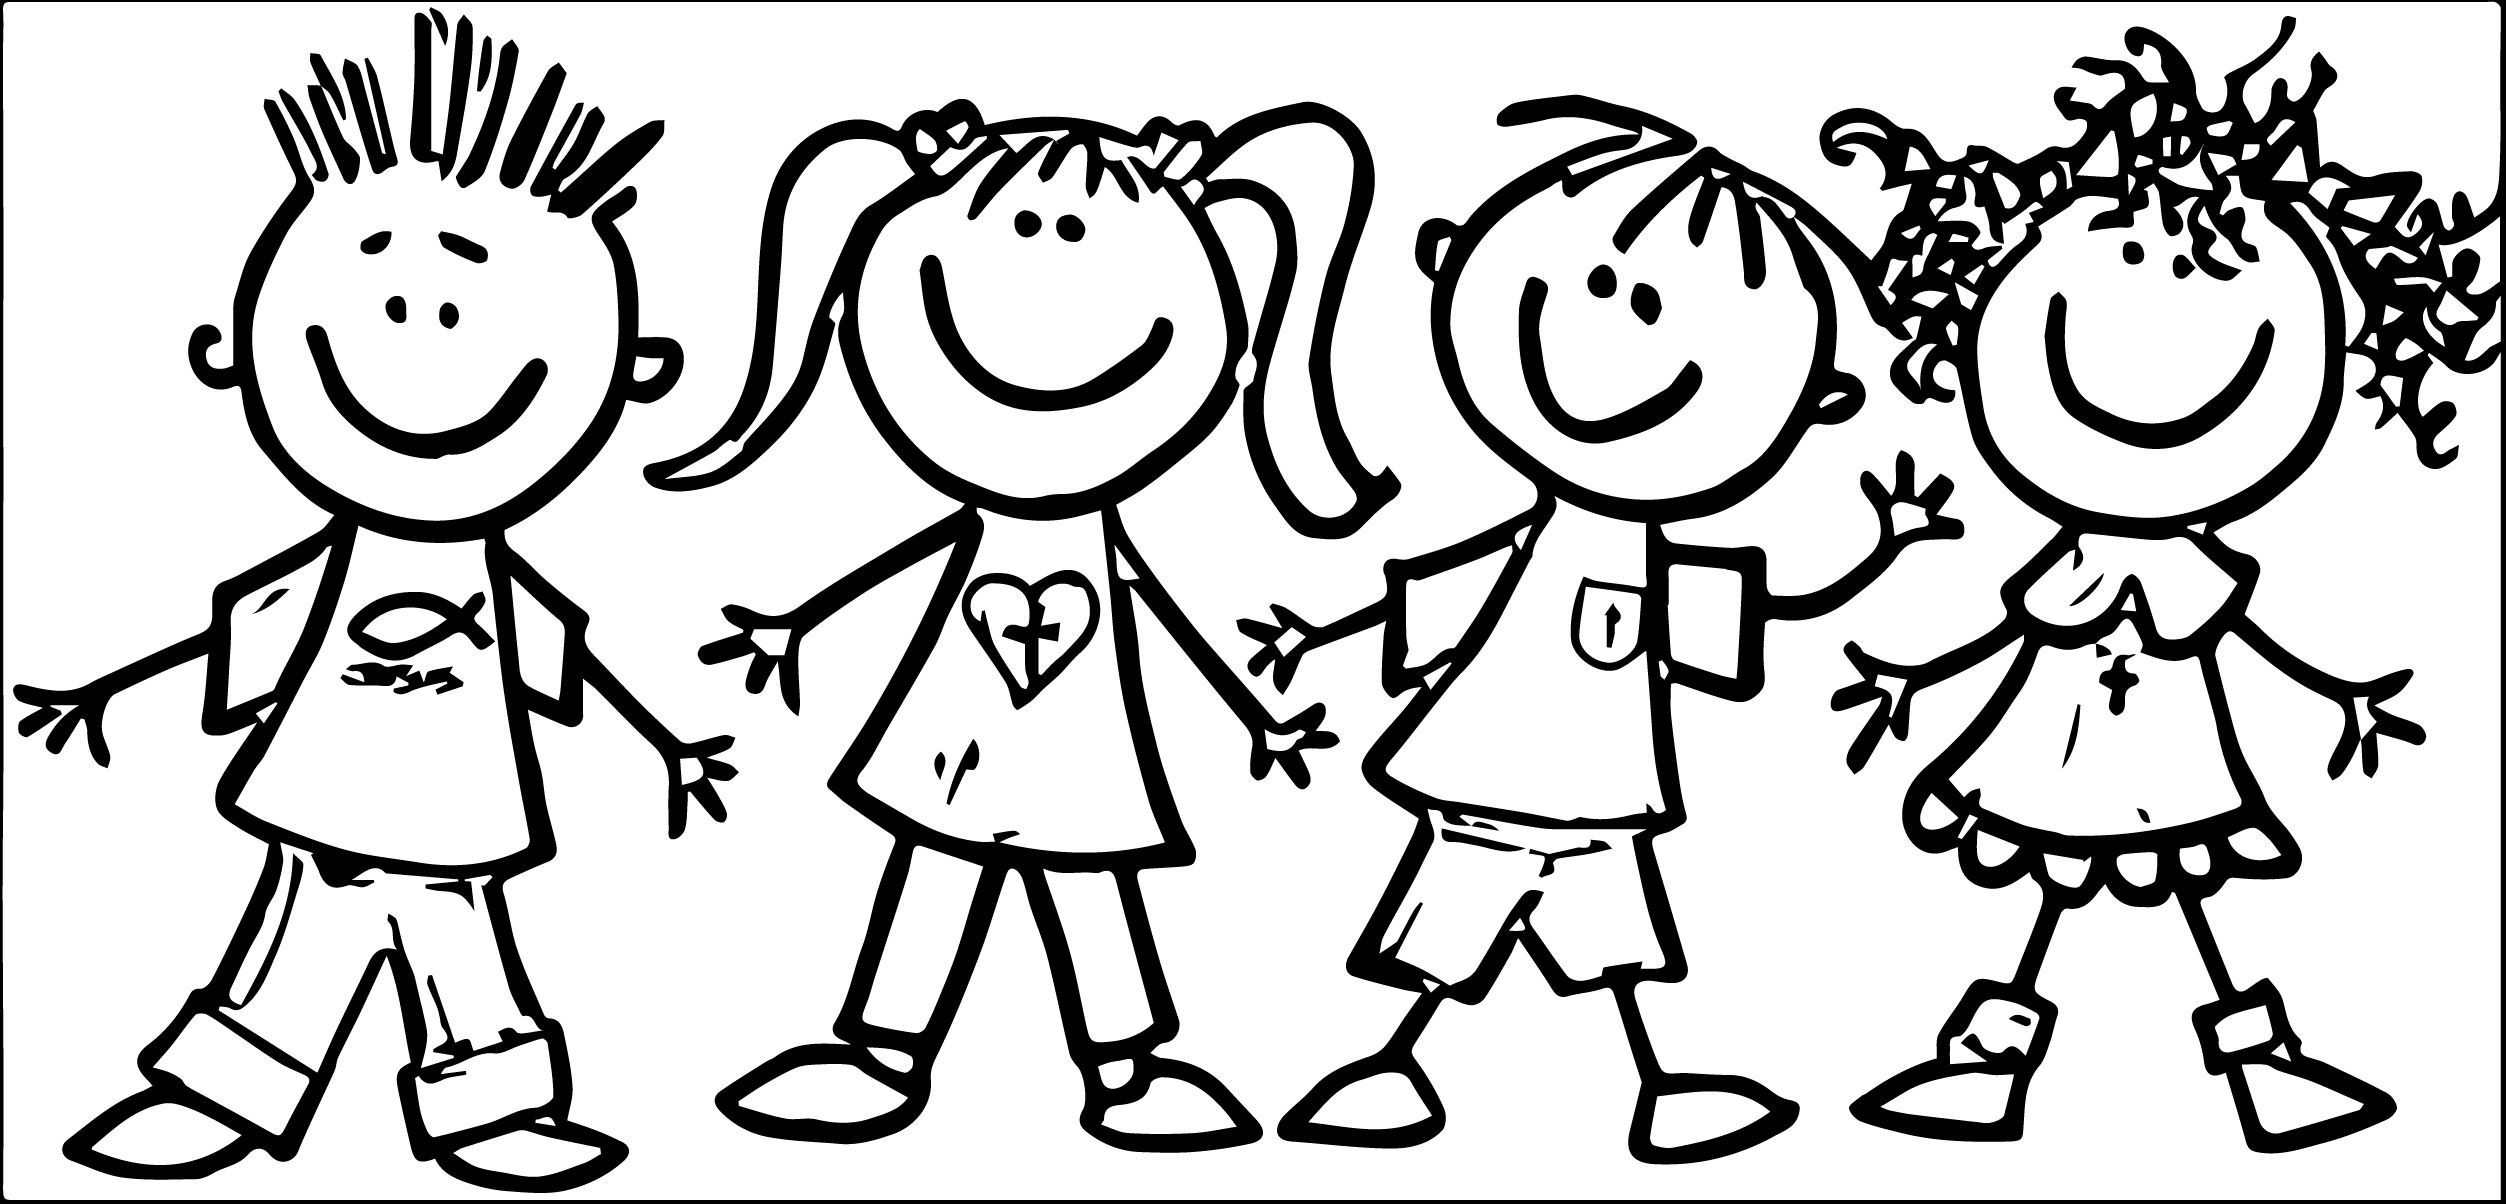 2 faced friends clipart clipart images gallery for free.